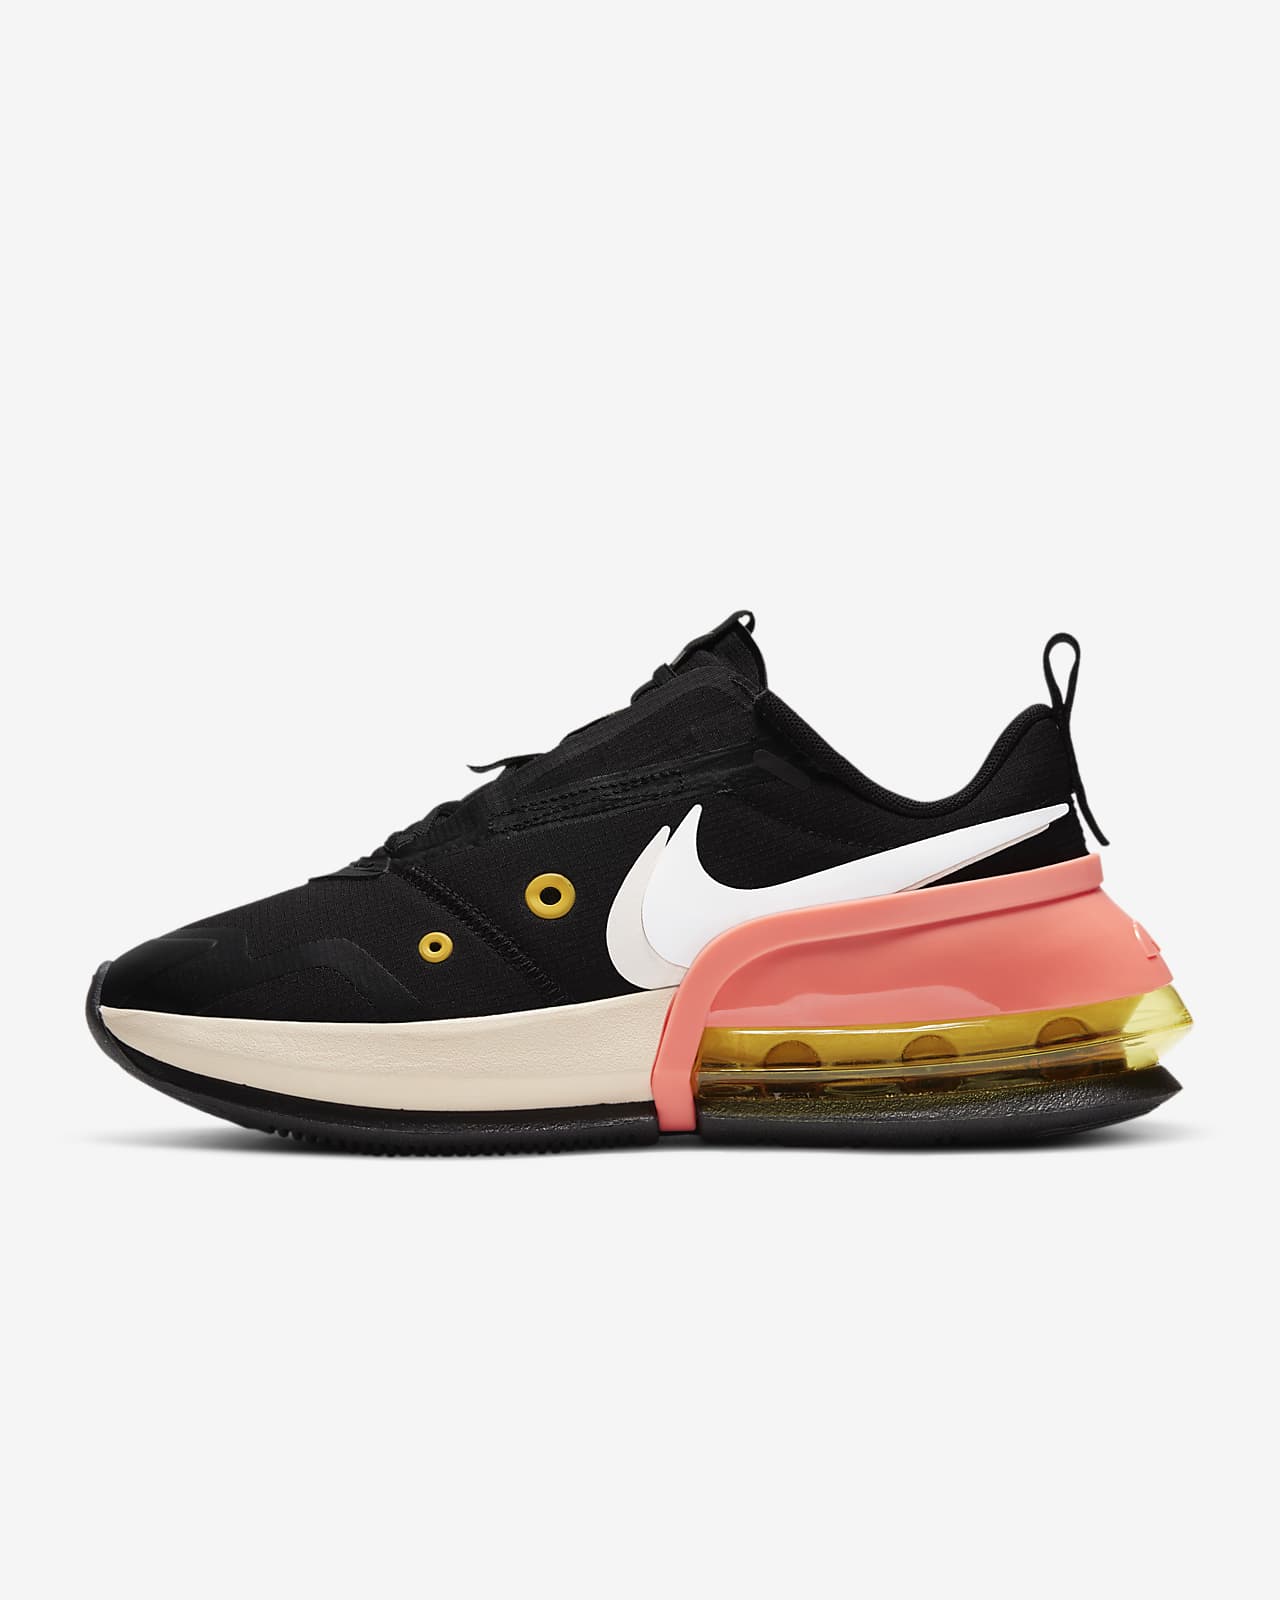 Women’s Nike Air Max Up ‘Black / Solar Flare’ .97 Free Shipping